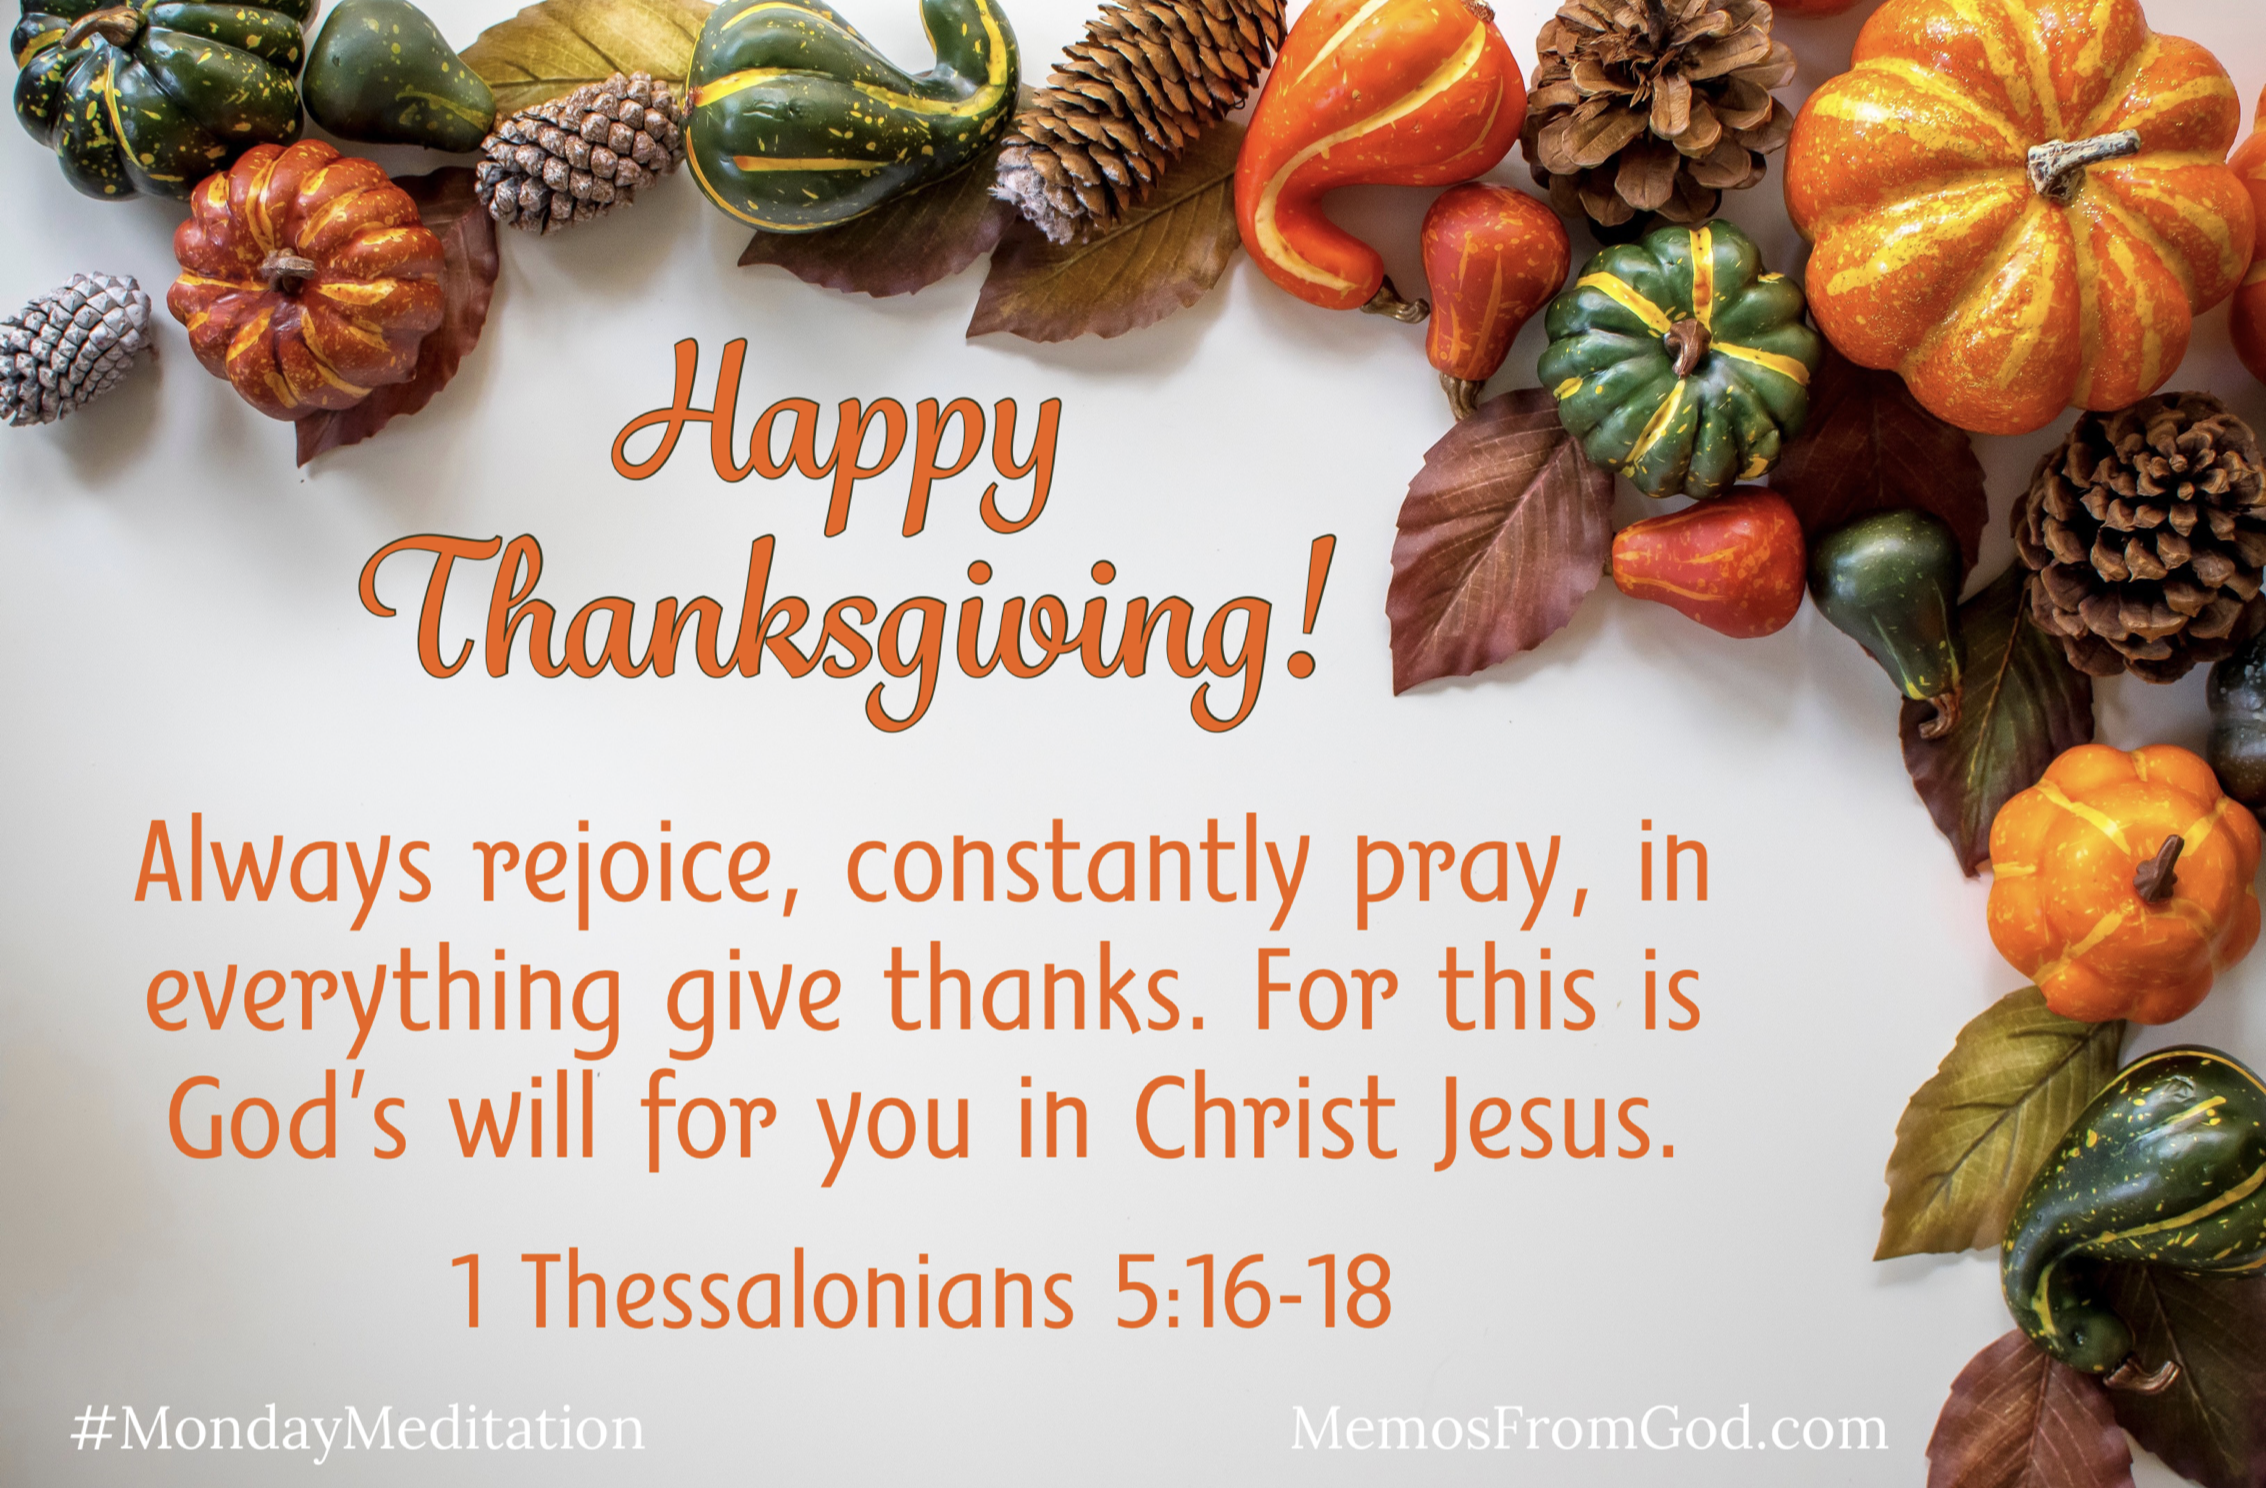 A variety of gourds frame an open space with this caption: Happy Thanksgiving! Always rejoice, constantly pray, in everything give thanks. For this is God's will for you in Christ Jesus. 1 Thessalonians 5:16-18